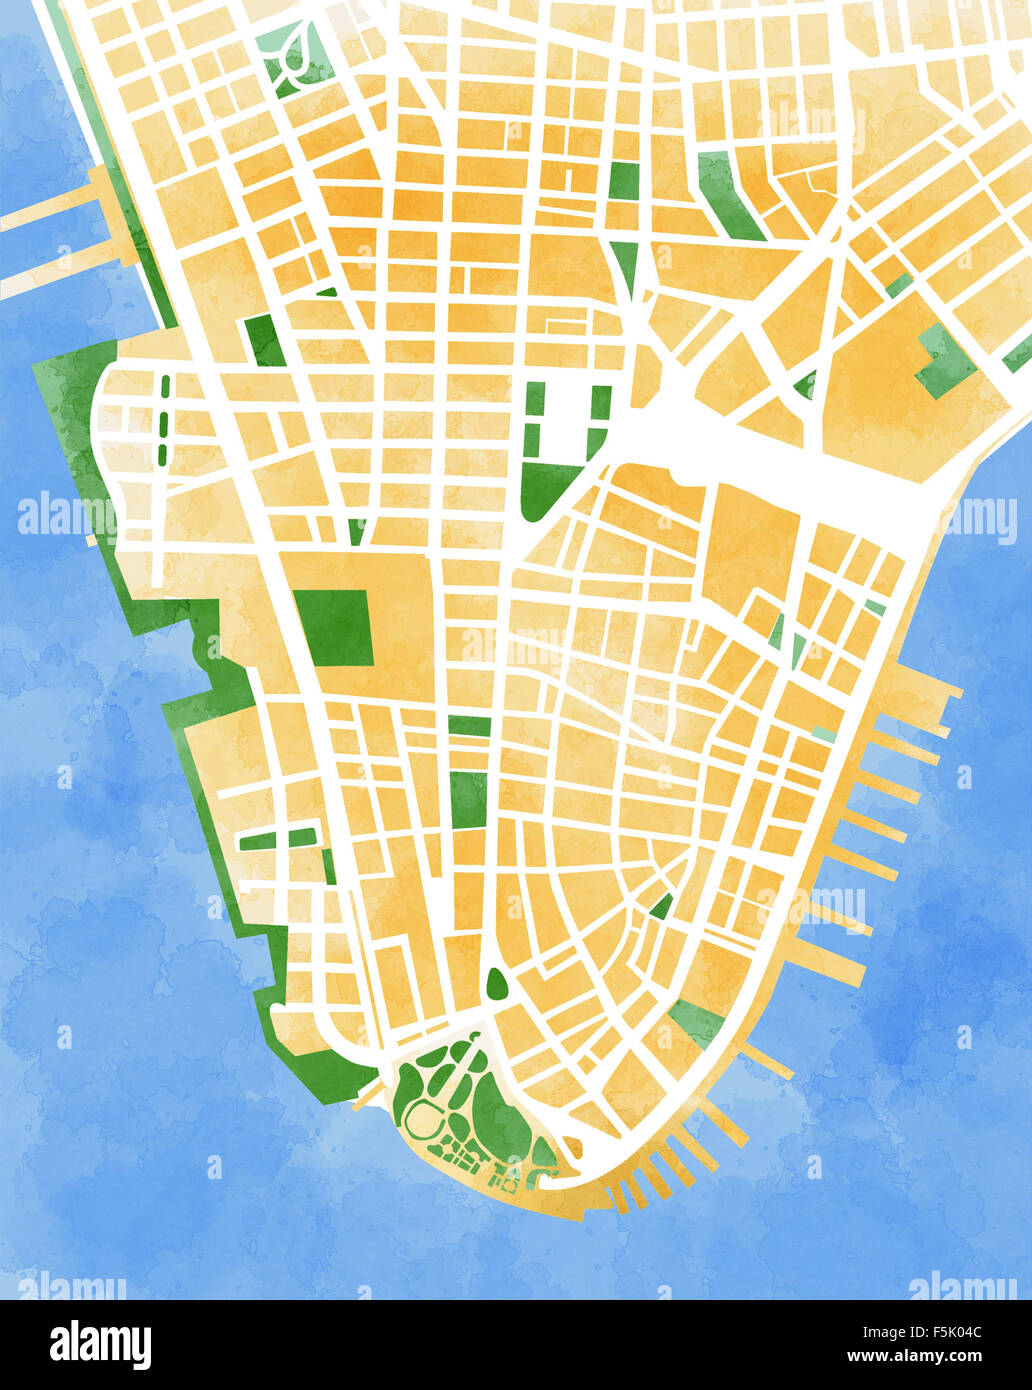 Watercolor Colorful Map Of Manhattan Island In New York Usa F5K04C 